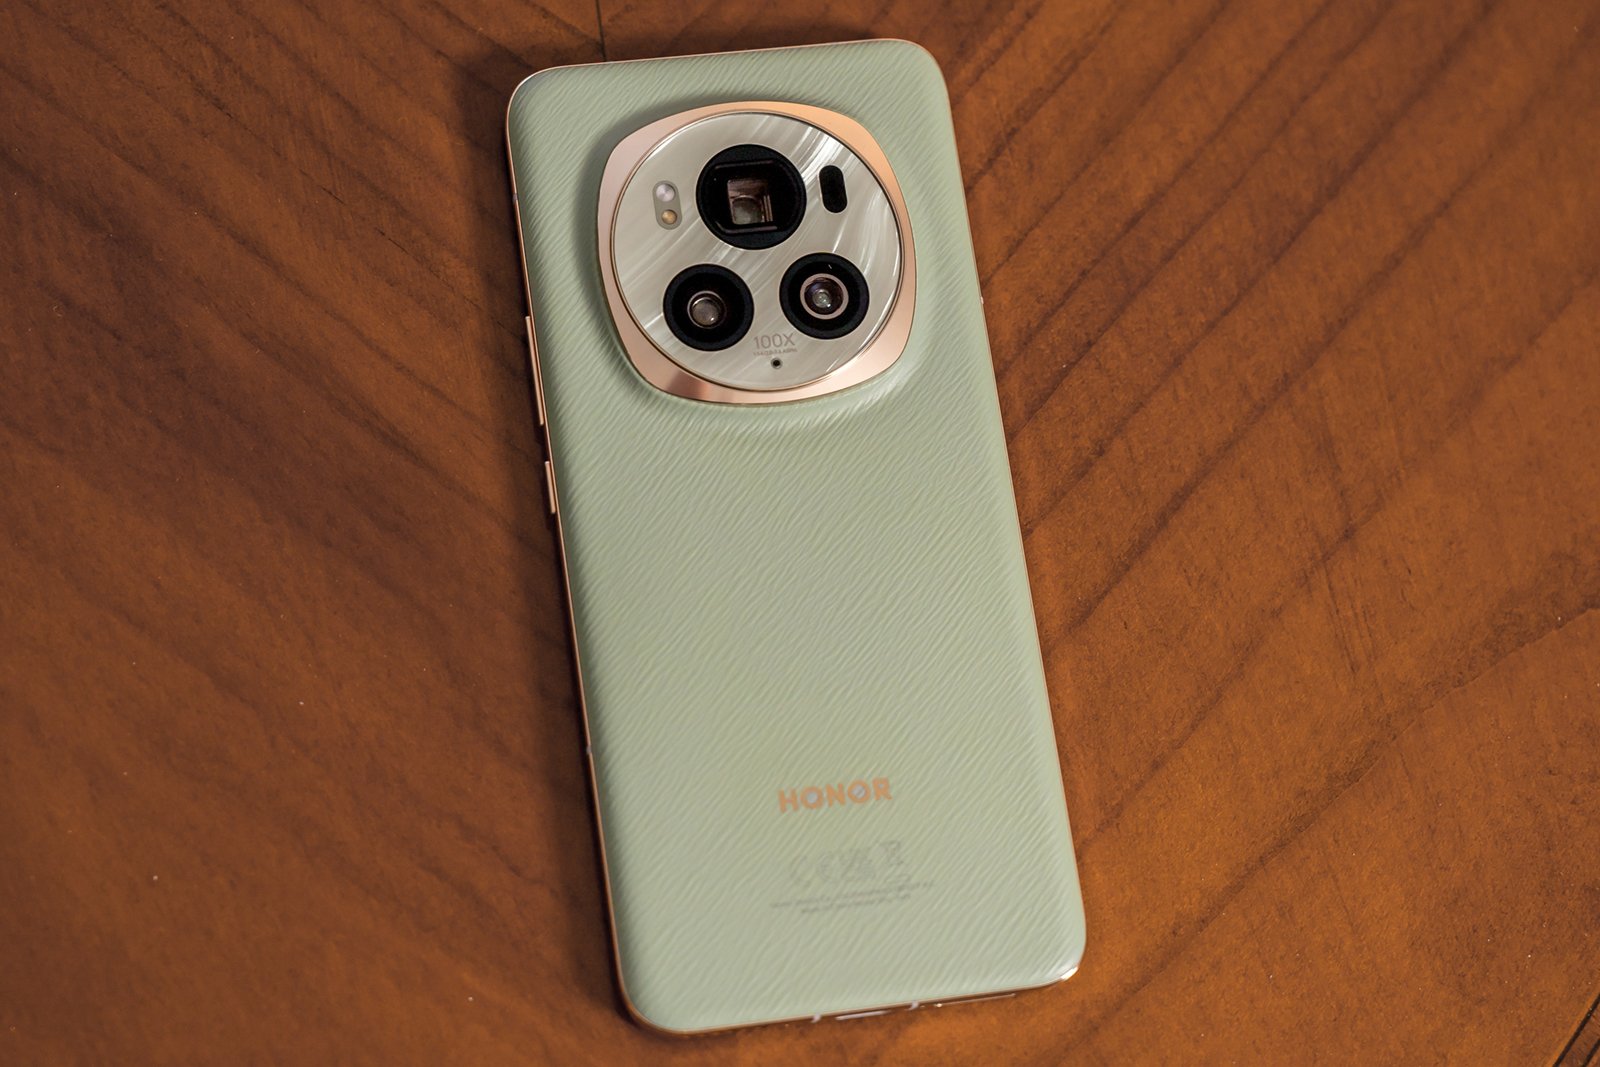 A mint green honor smartphone lying on a wooden surface, featuring a prominent circular camera module with multiple lenses.